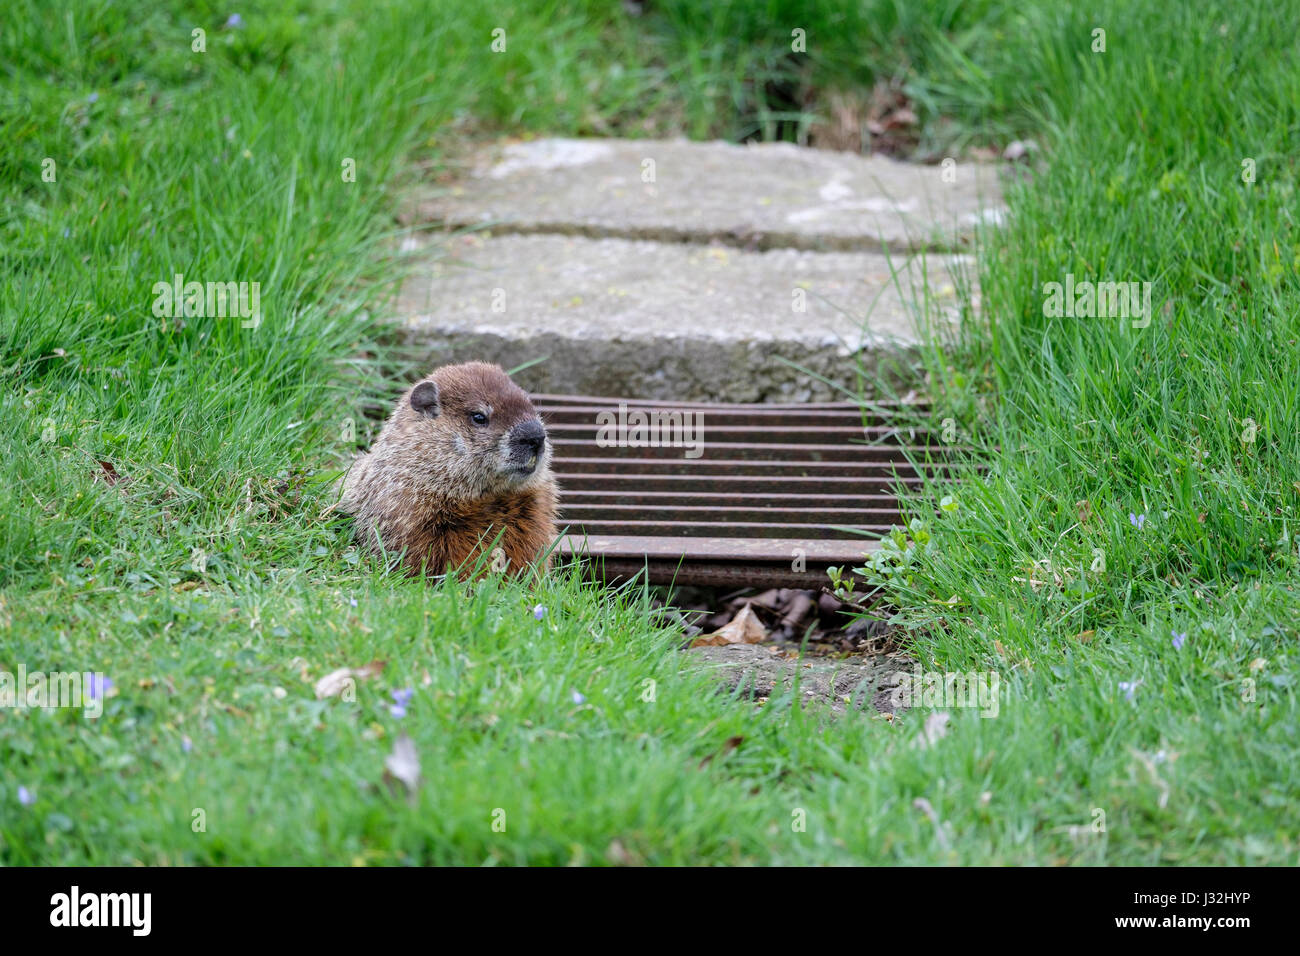 Male groundhog, woodchuck, (Marmota monax) at the entrance of its burrow in an urban setting, city park, London, Ontario, Canada. Stock Photo